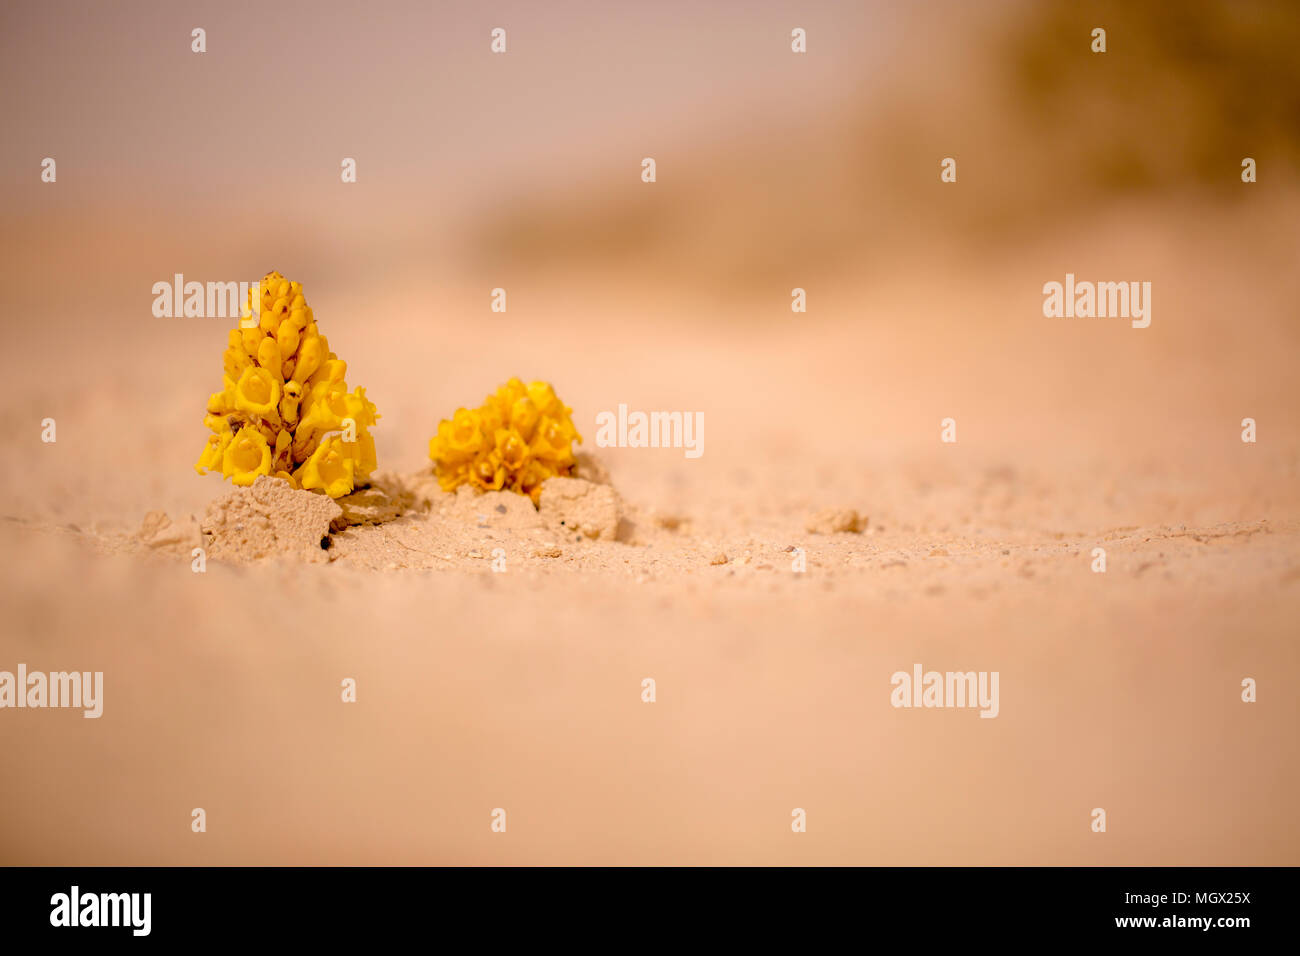 Yellow or desert broomrape (Cistanche tubulosa) flowering in the desert. This plant is a parasitic member of the broomrape family. Stock Photo